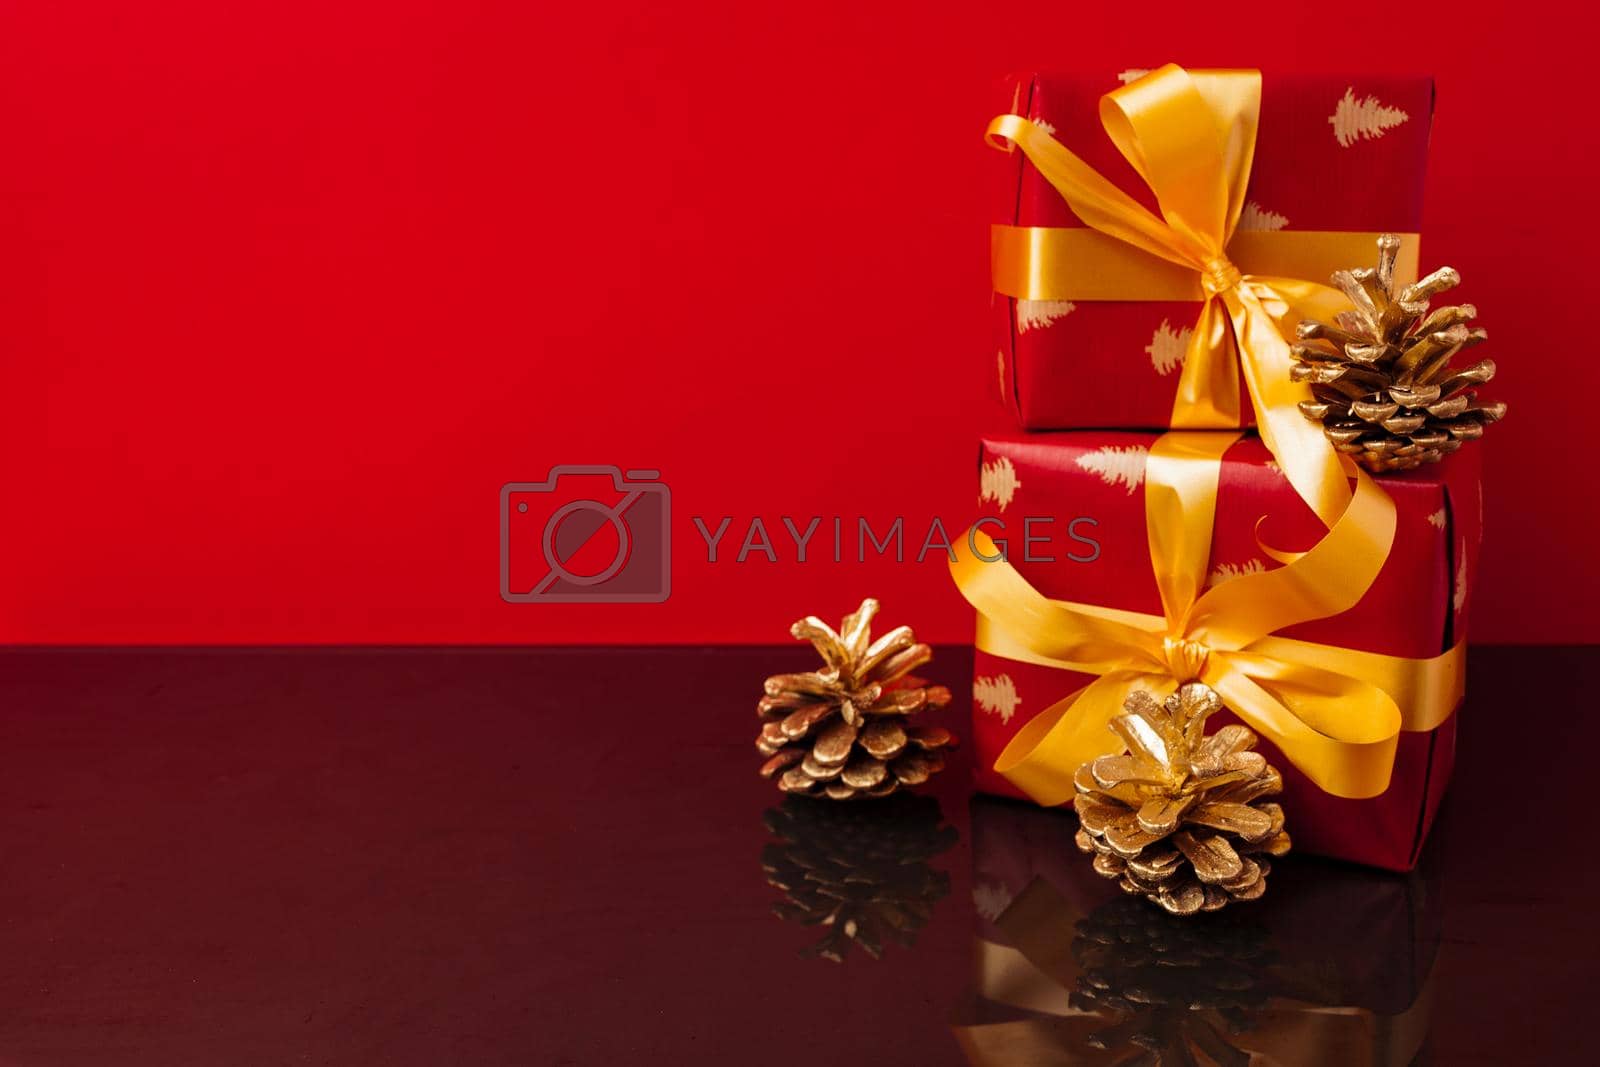 Royalty free image of Several stacked Christmas gifts in festive wrapping by Fabrikasimf